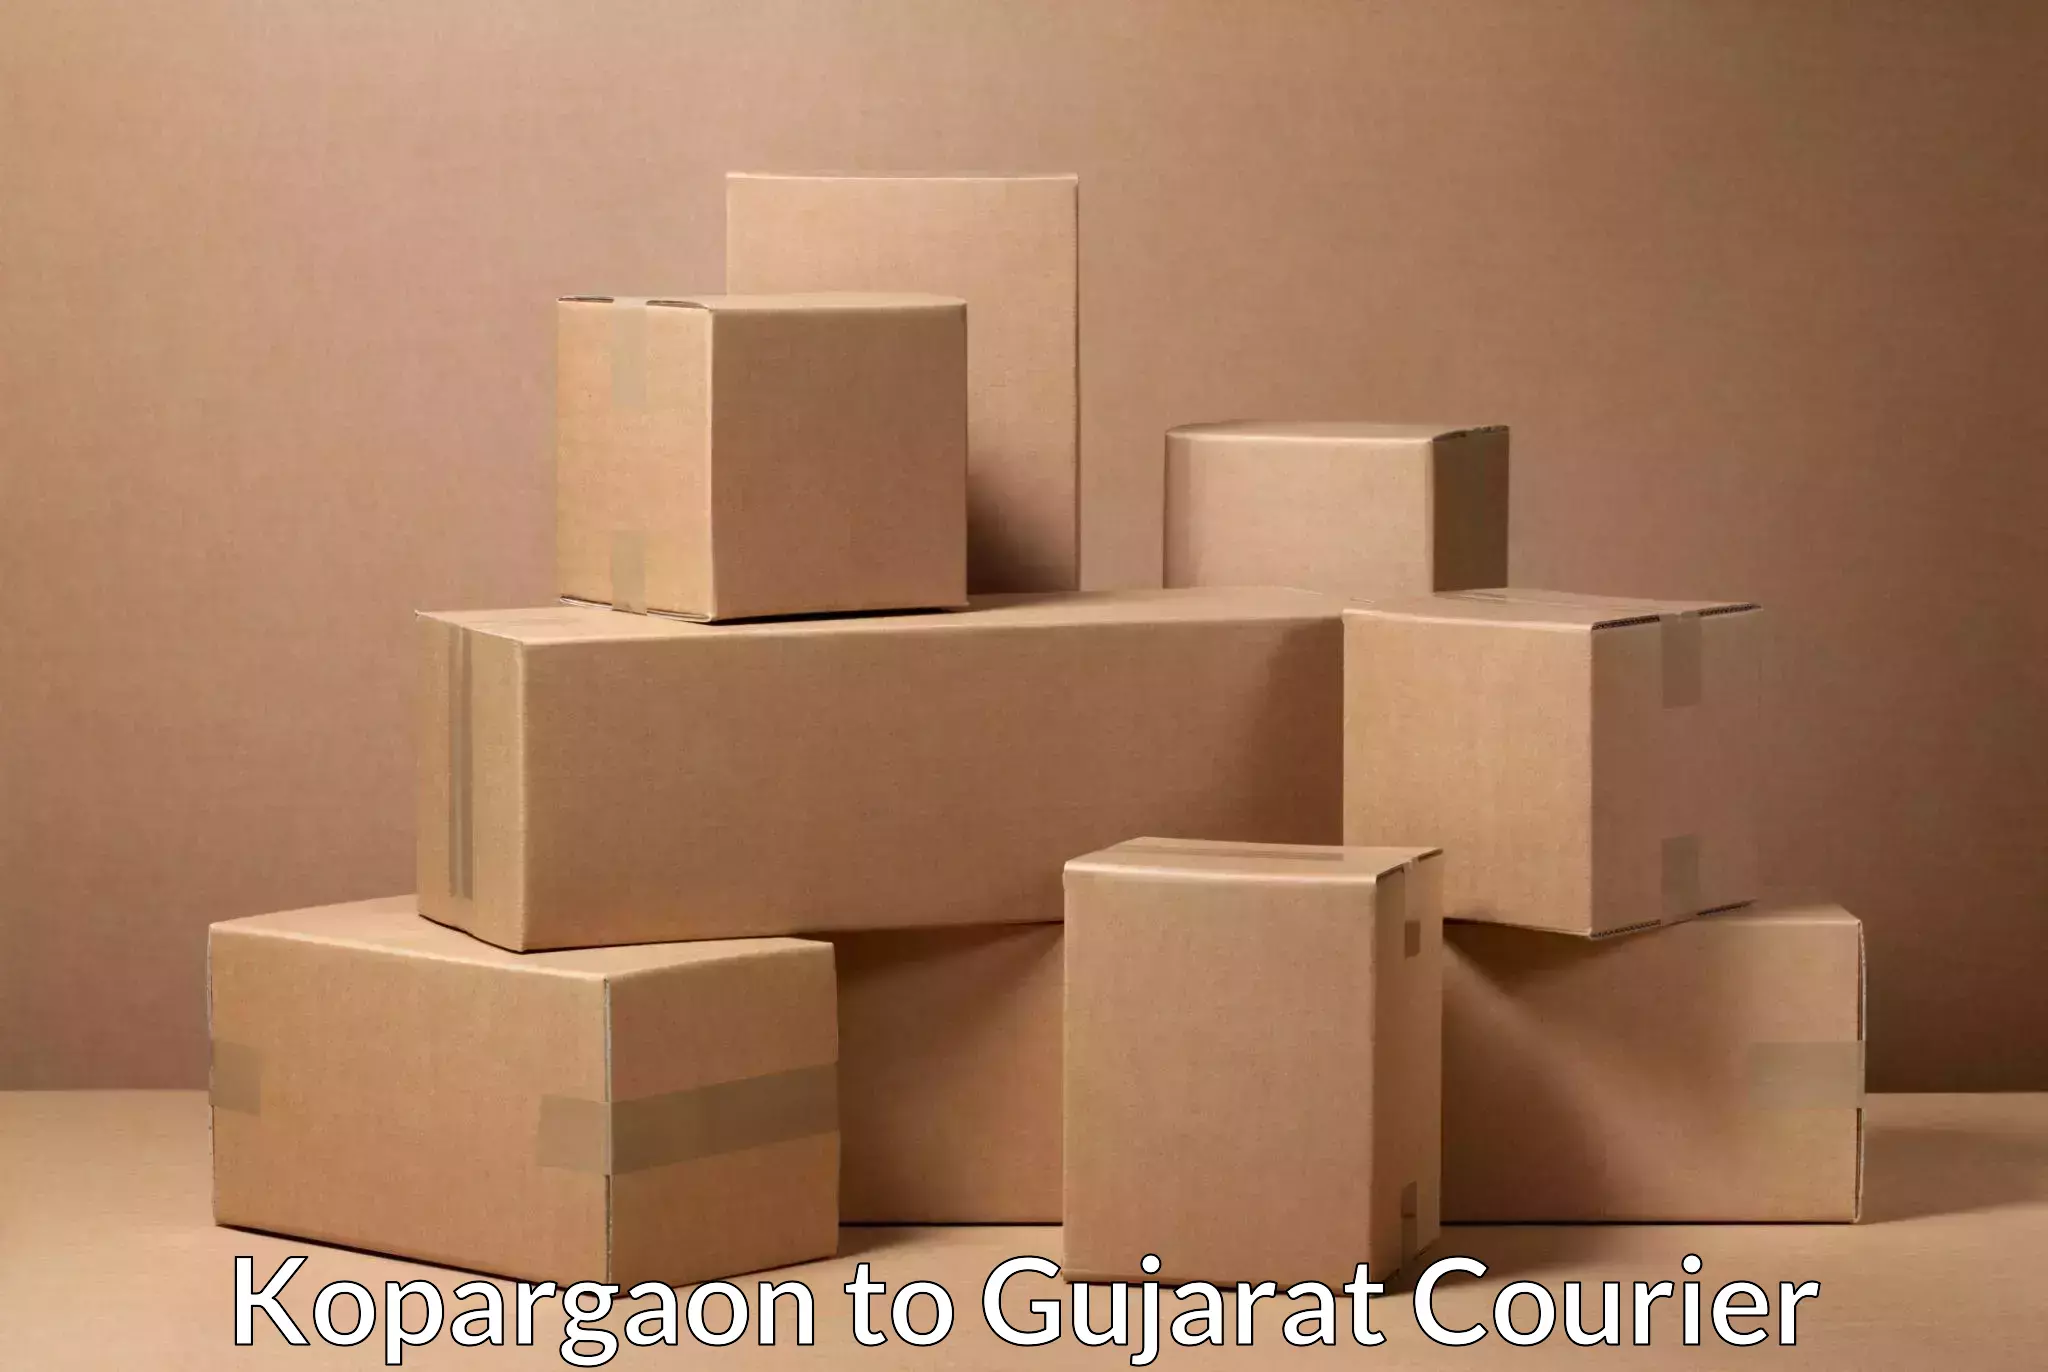 Multi-service courier options Kopargaon to Songadh